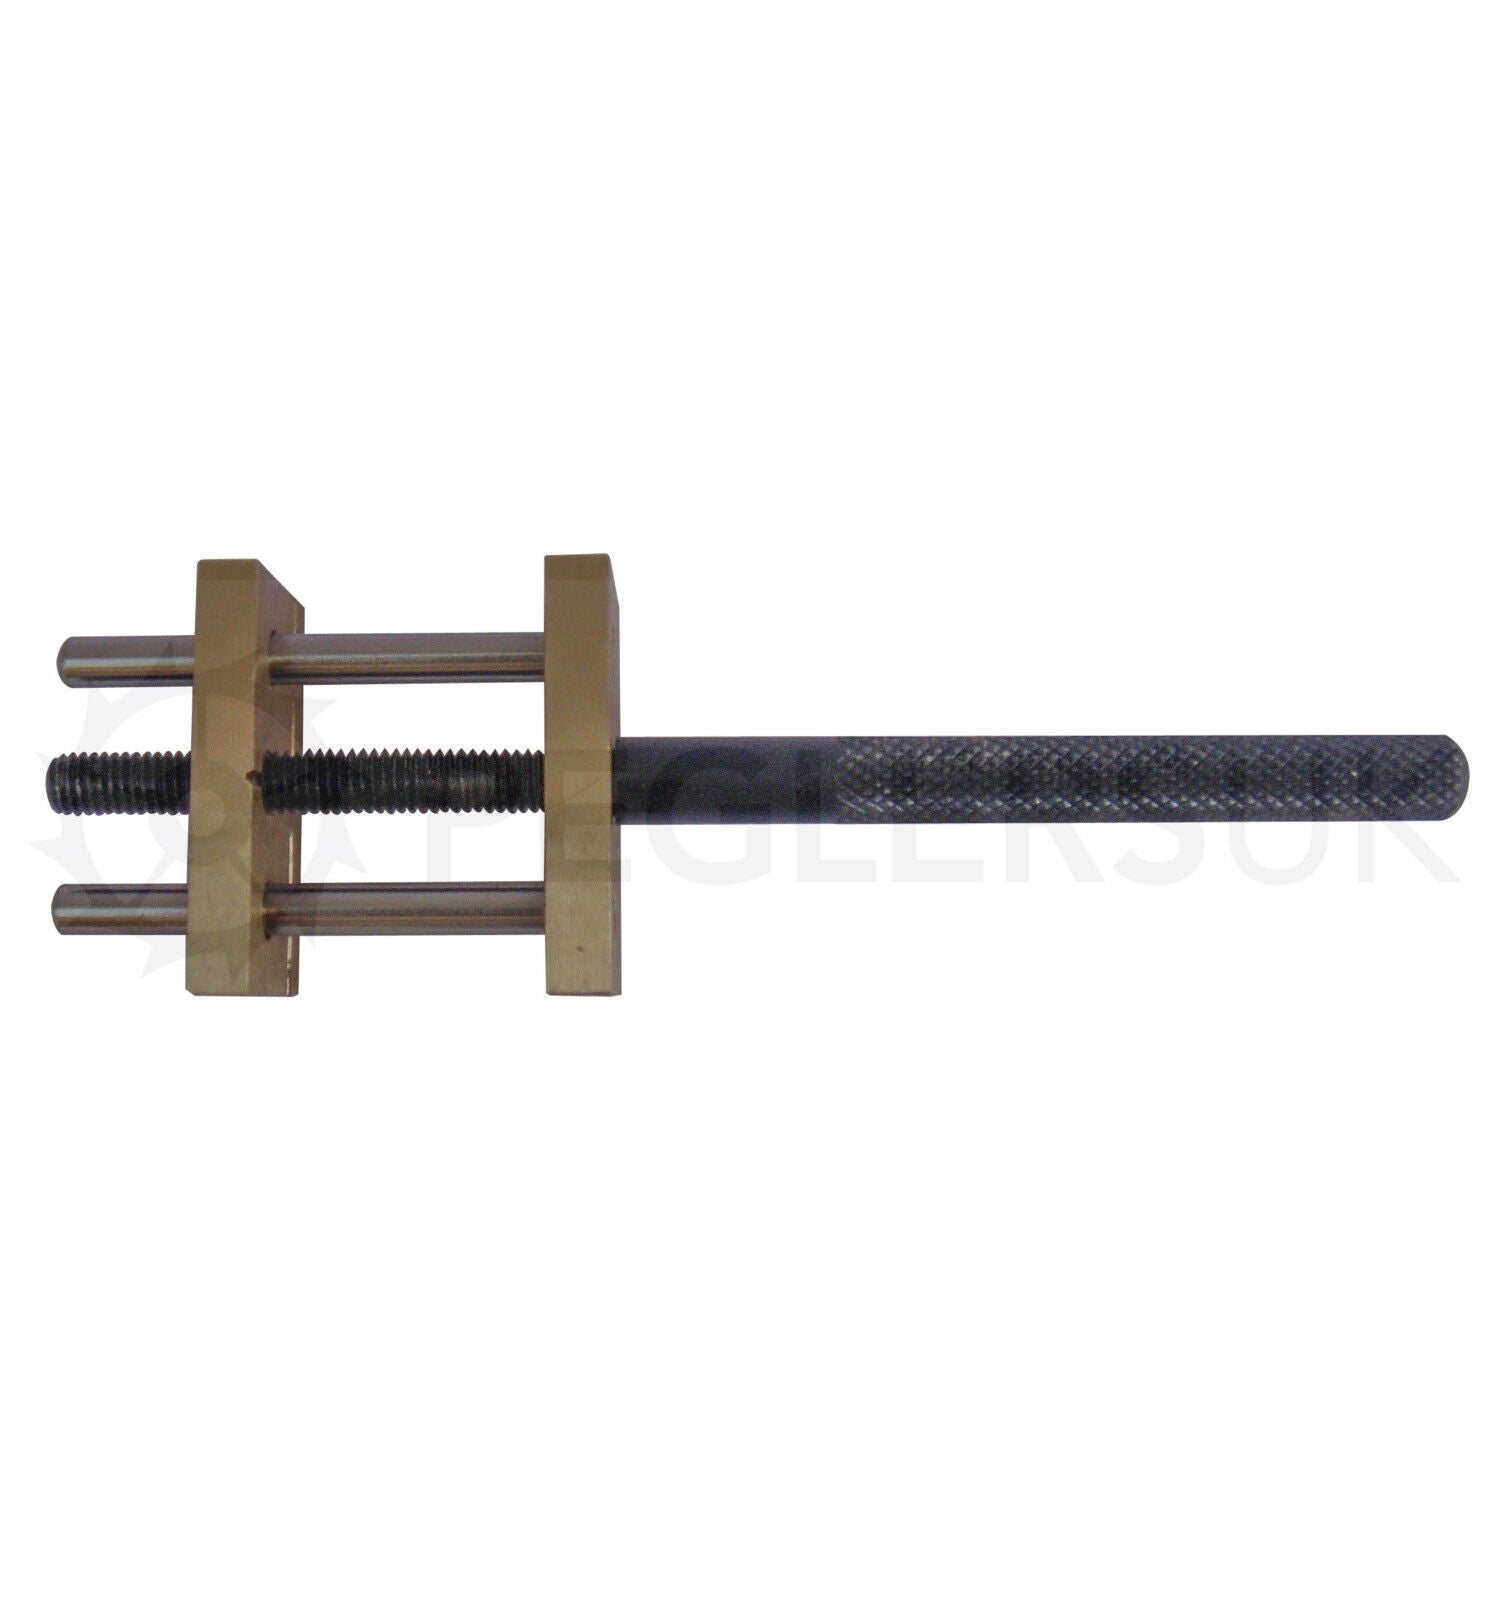 Hand Vice/Clamp - Made Of Brass And Steel 5 1/2"